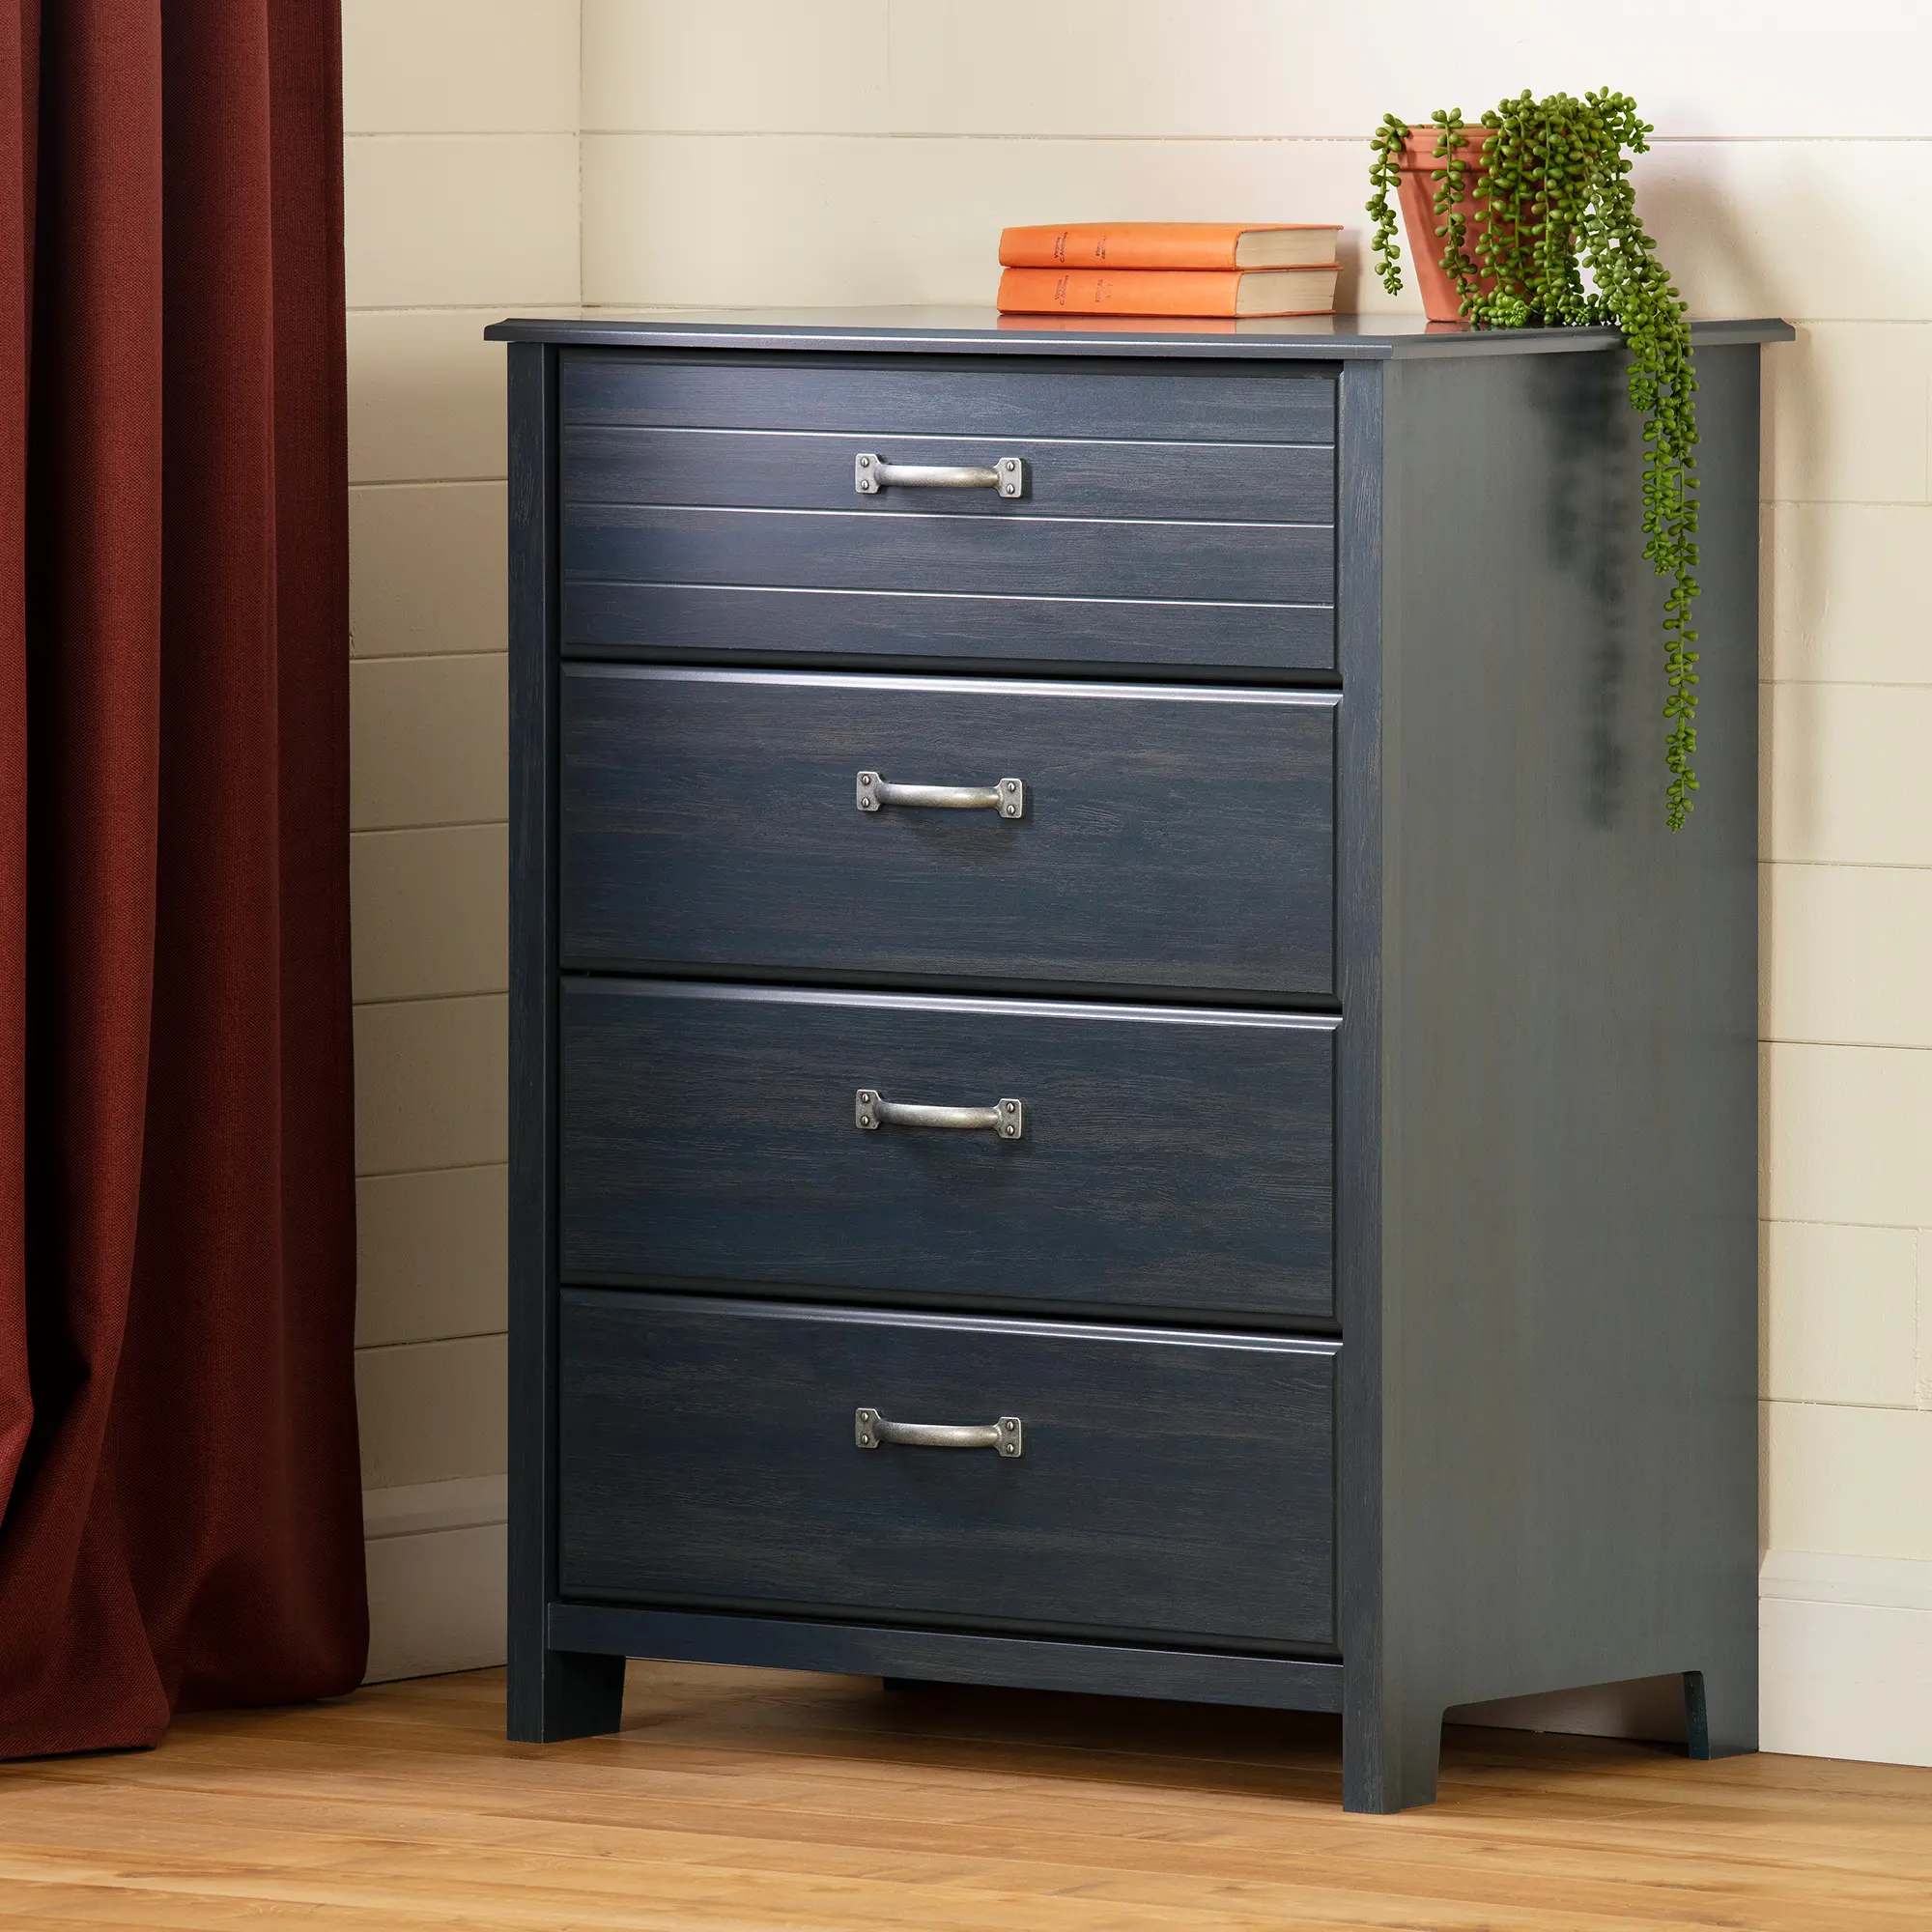 12724 Asten Contemporary Blue Chest of Drawers - South S sku 12724